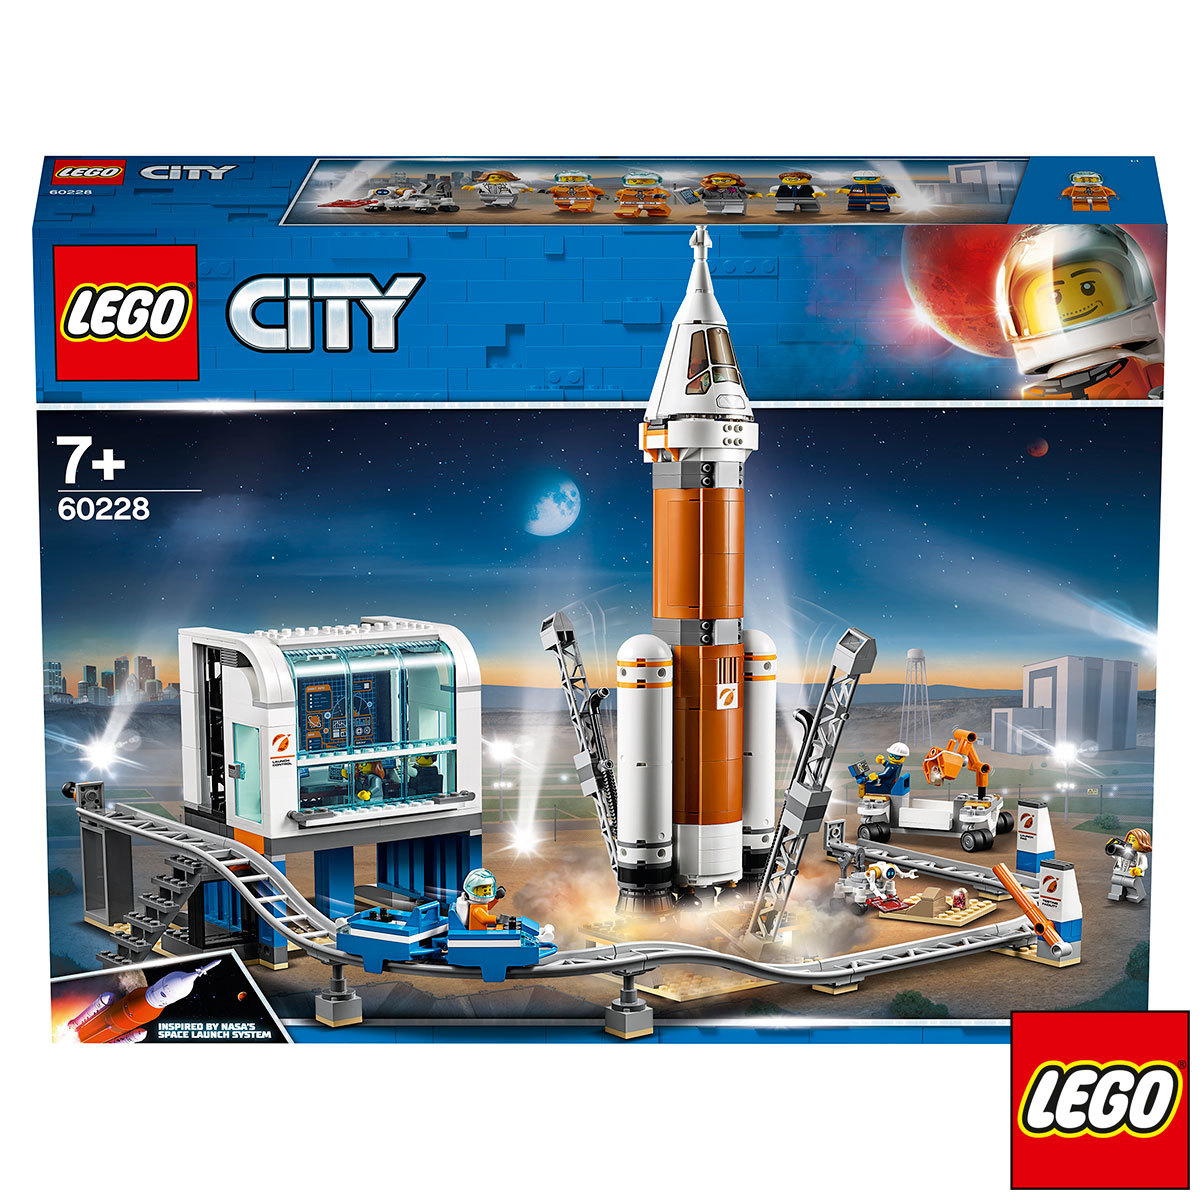 Boxed image front view of the LEGO deep space rocket and launch control